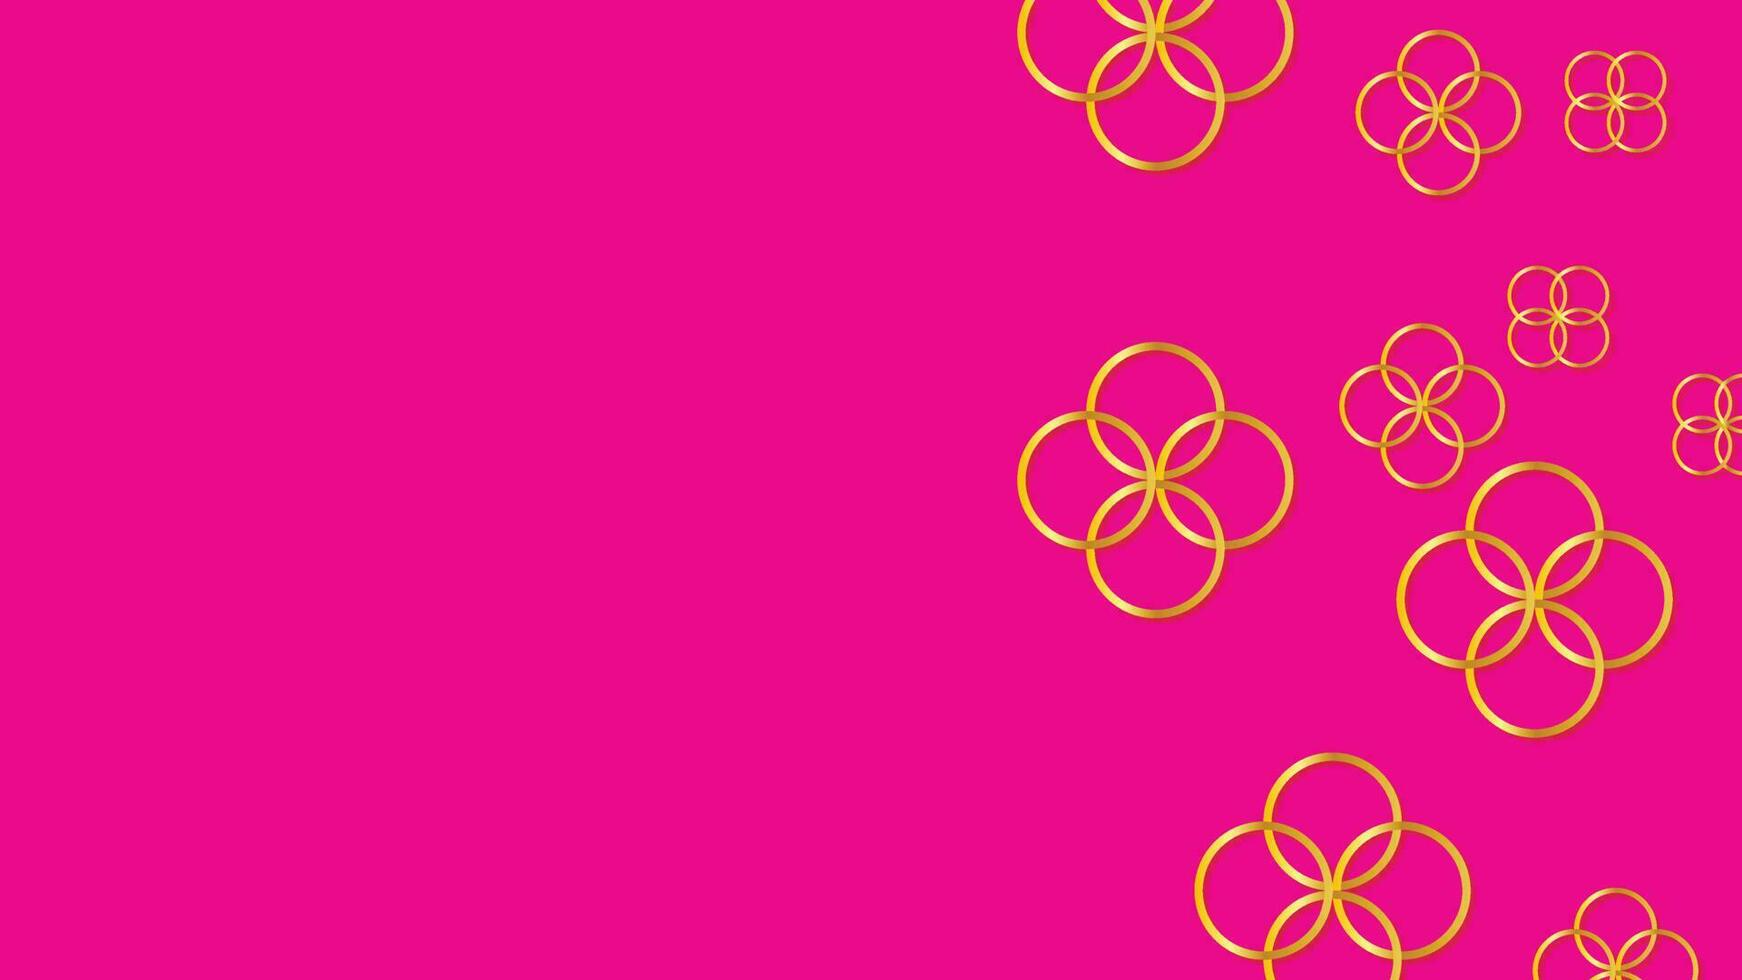 Abstract Gold Shapes on Pink vector